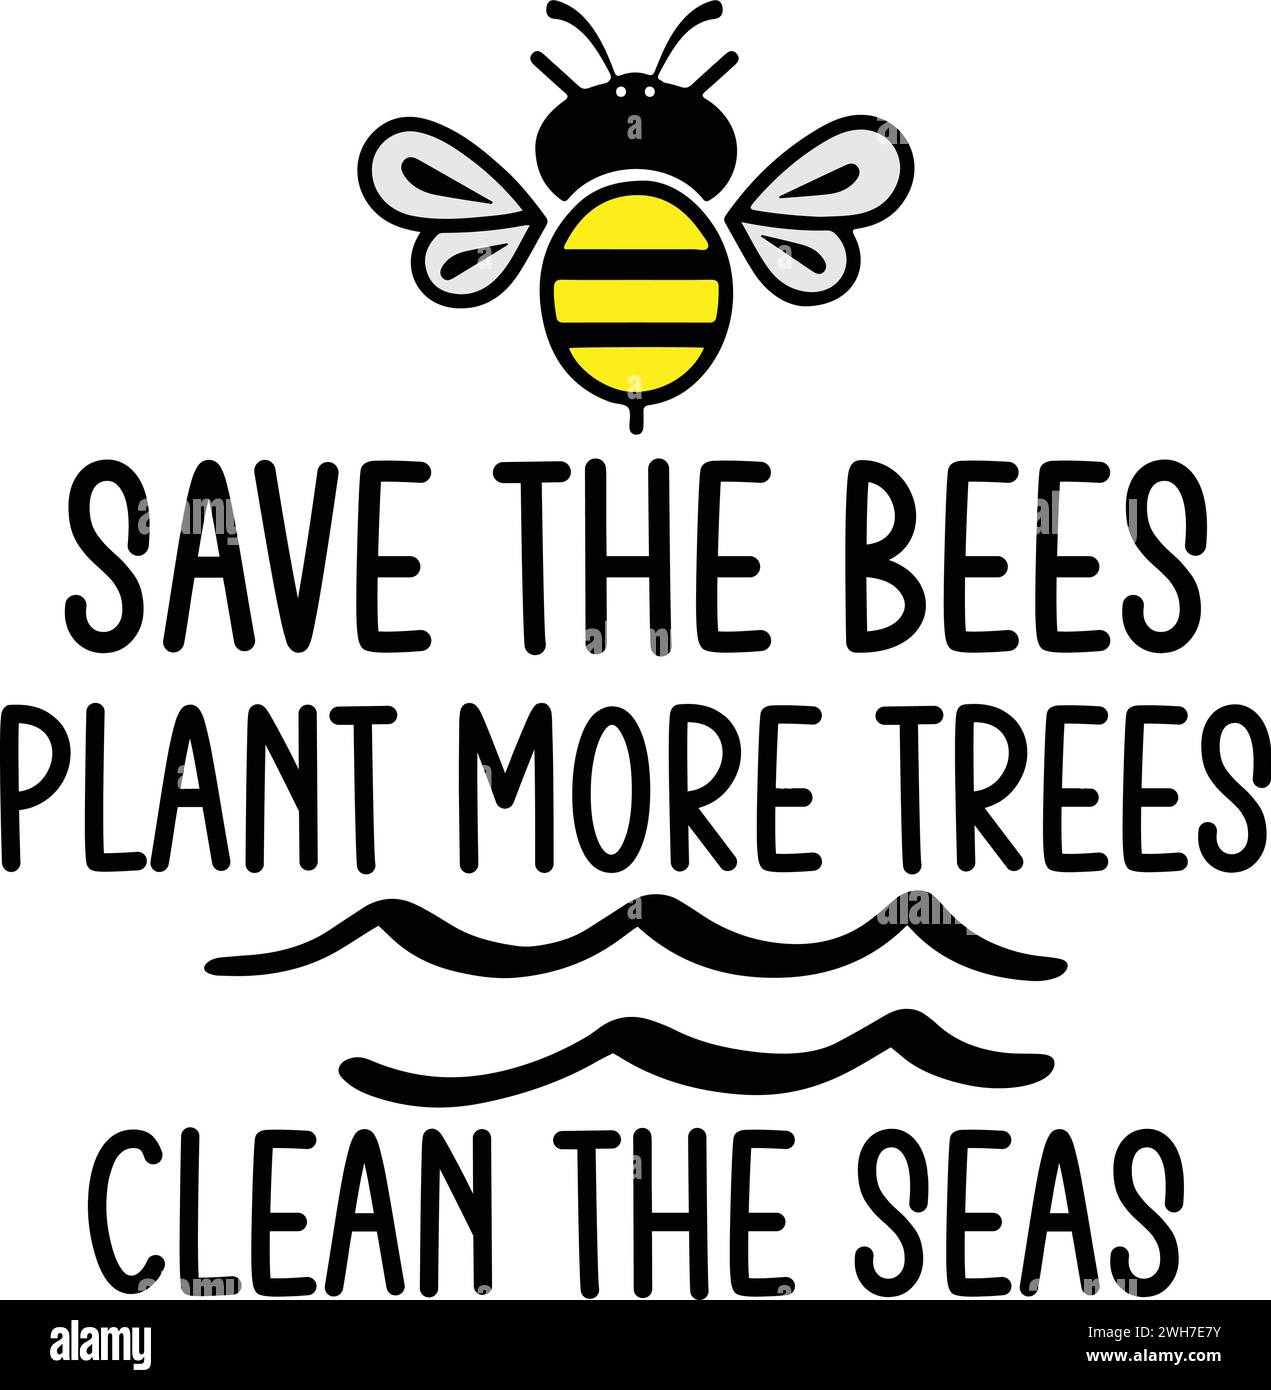 Save The Bees Plant More Trees Clean The Seas ,Bowl SVG Design Printable File Stock Vector